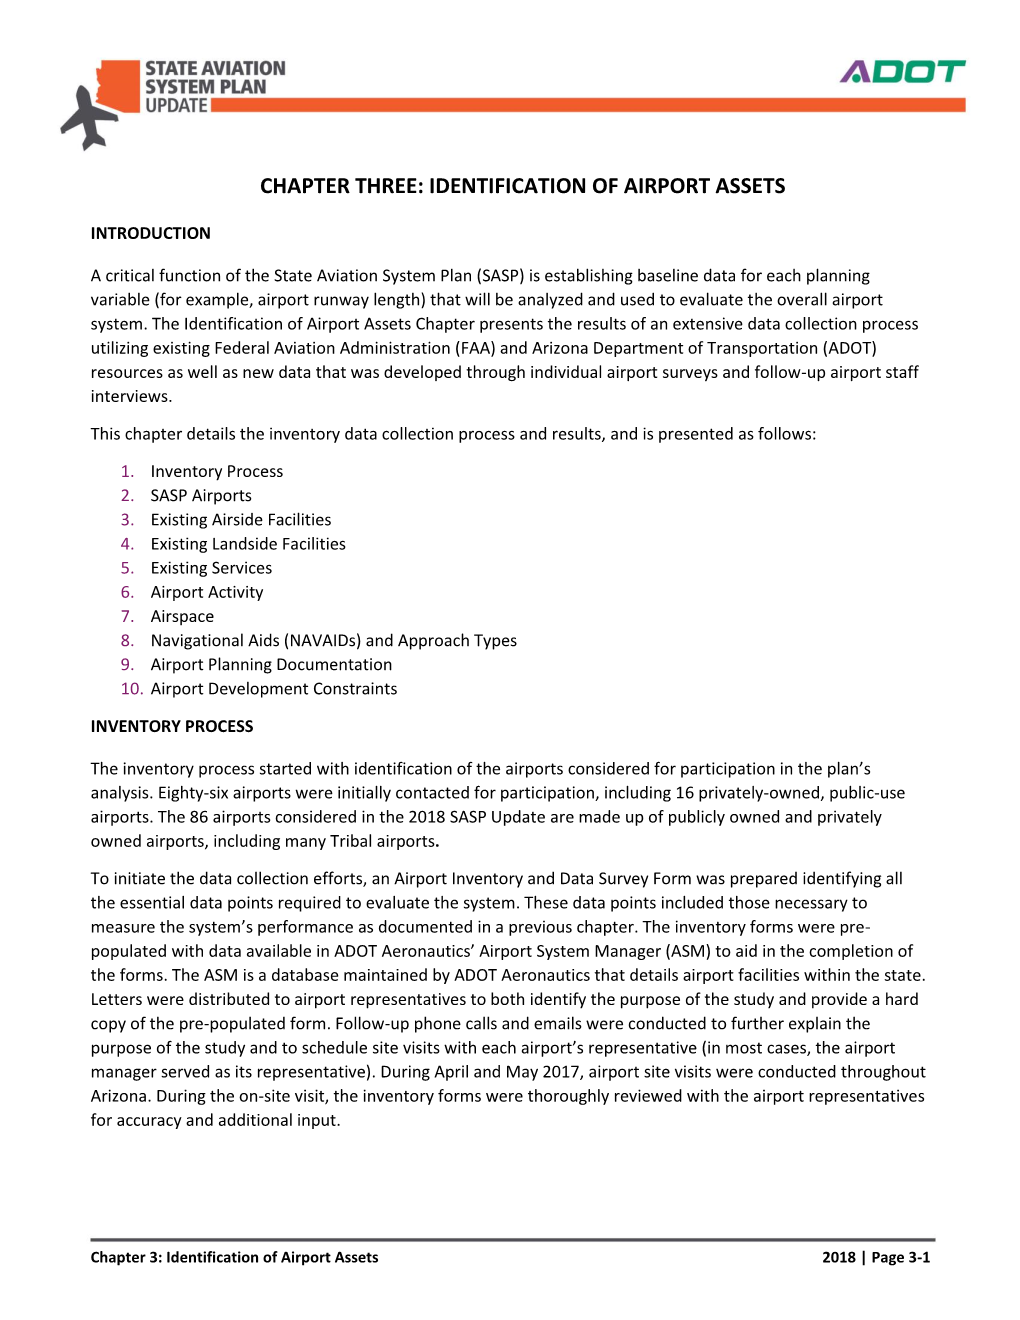 3. Chapter Three: Identification of Airport Assets